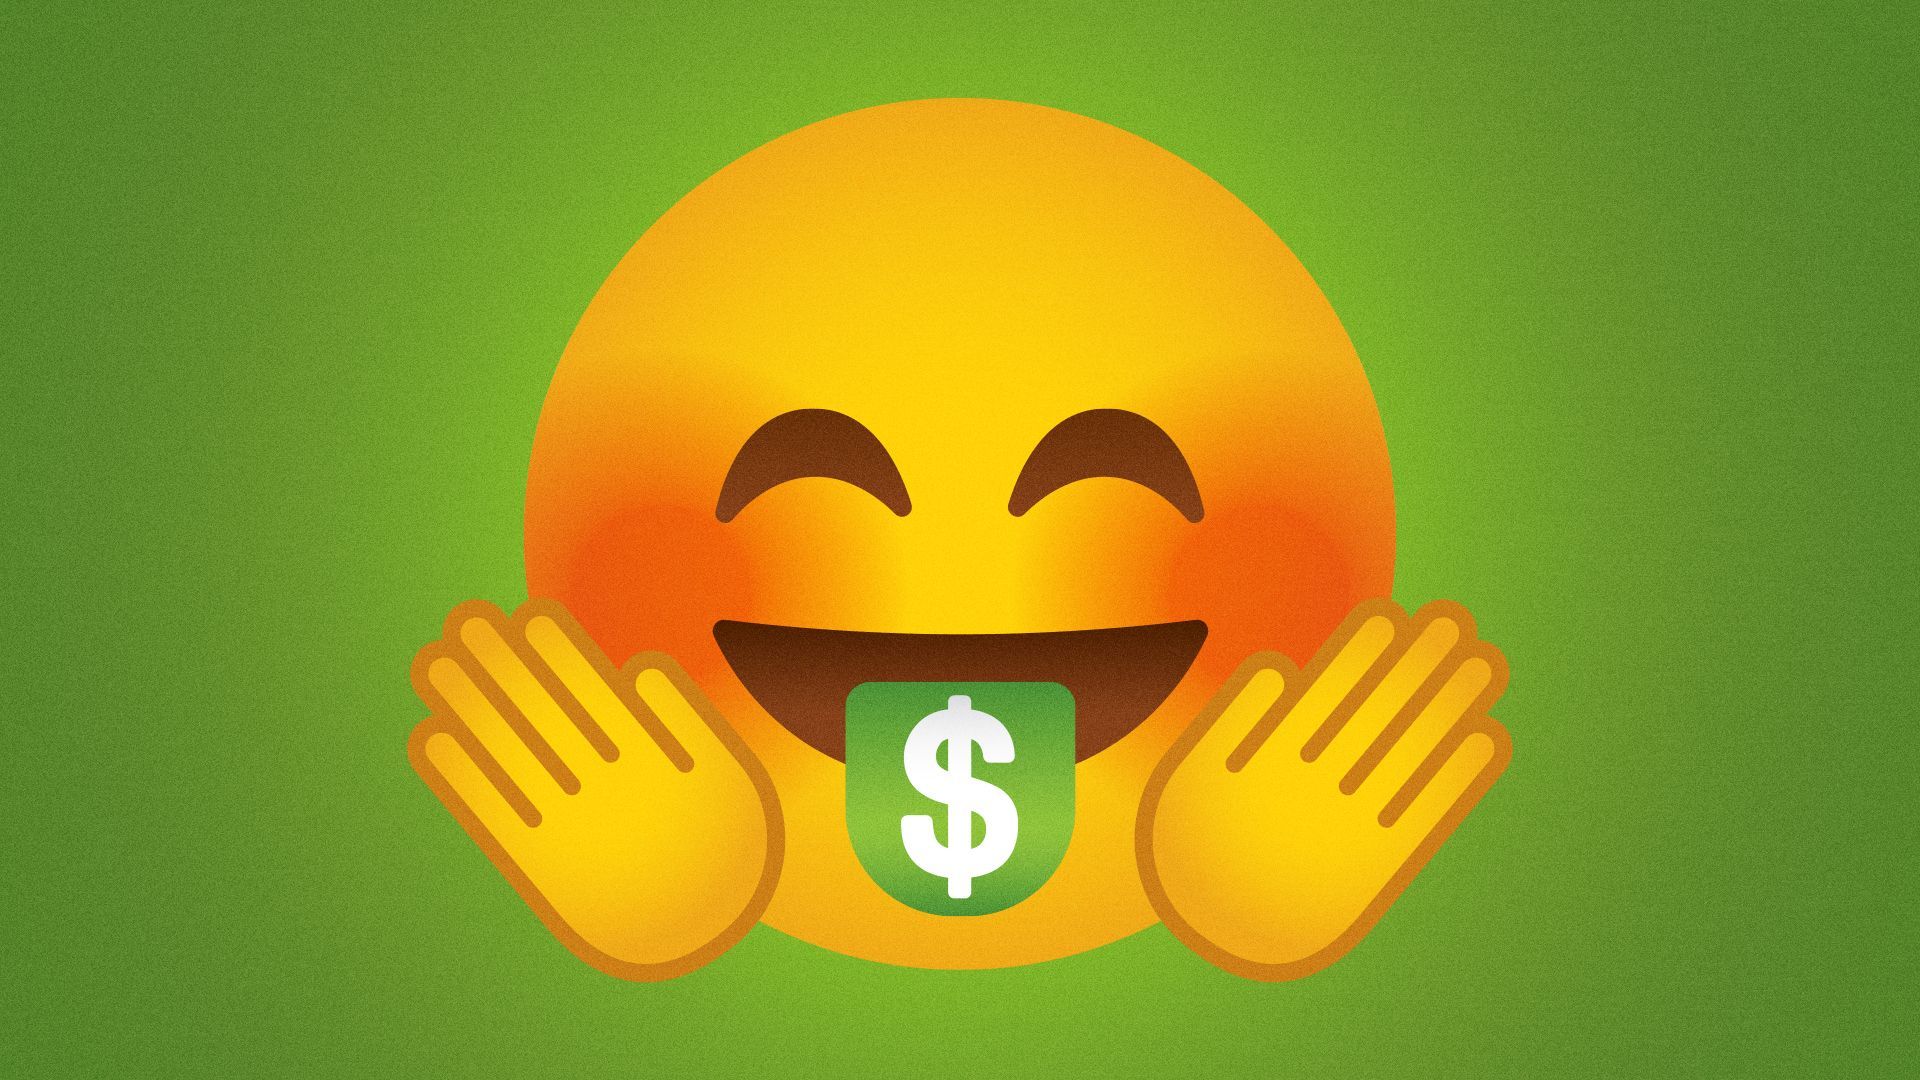 Illustration of a hugging face emoji with a money tongue. 